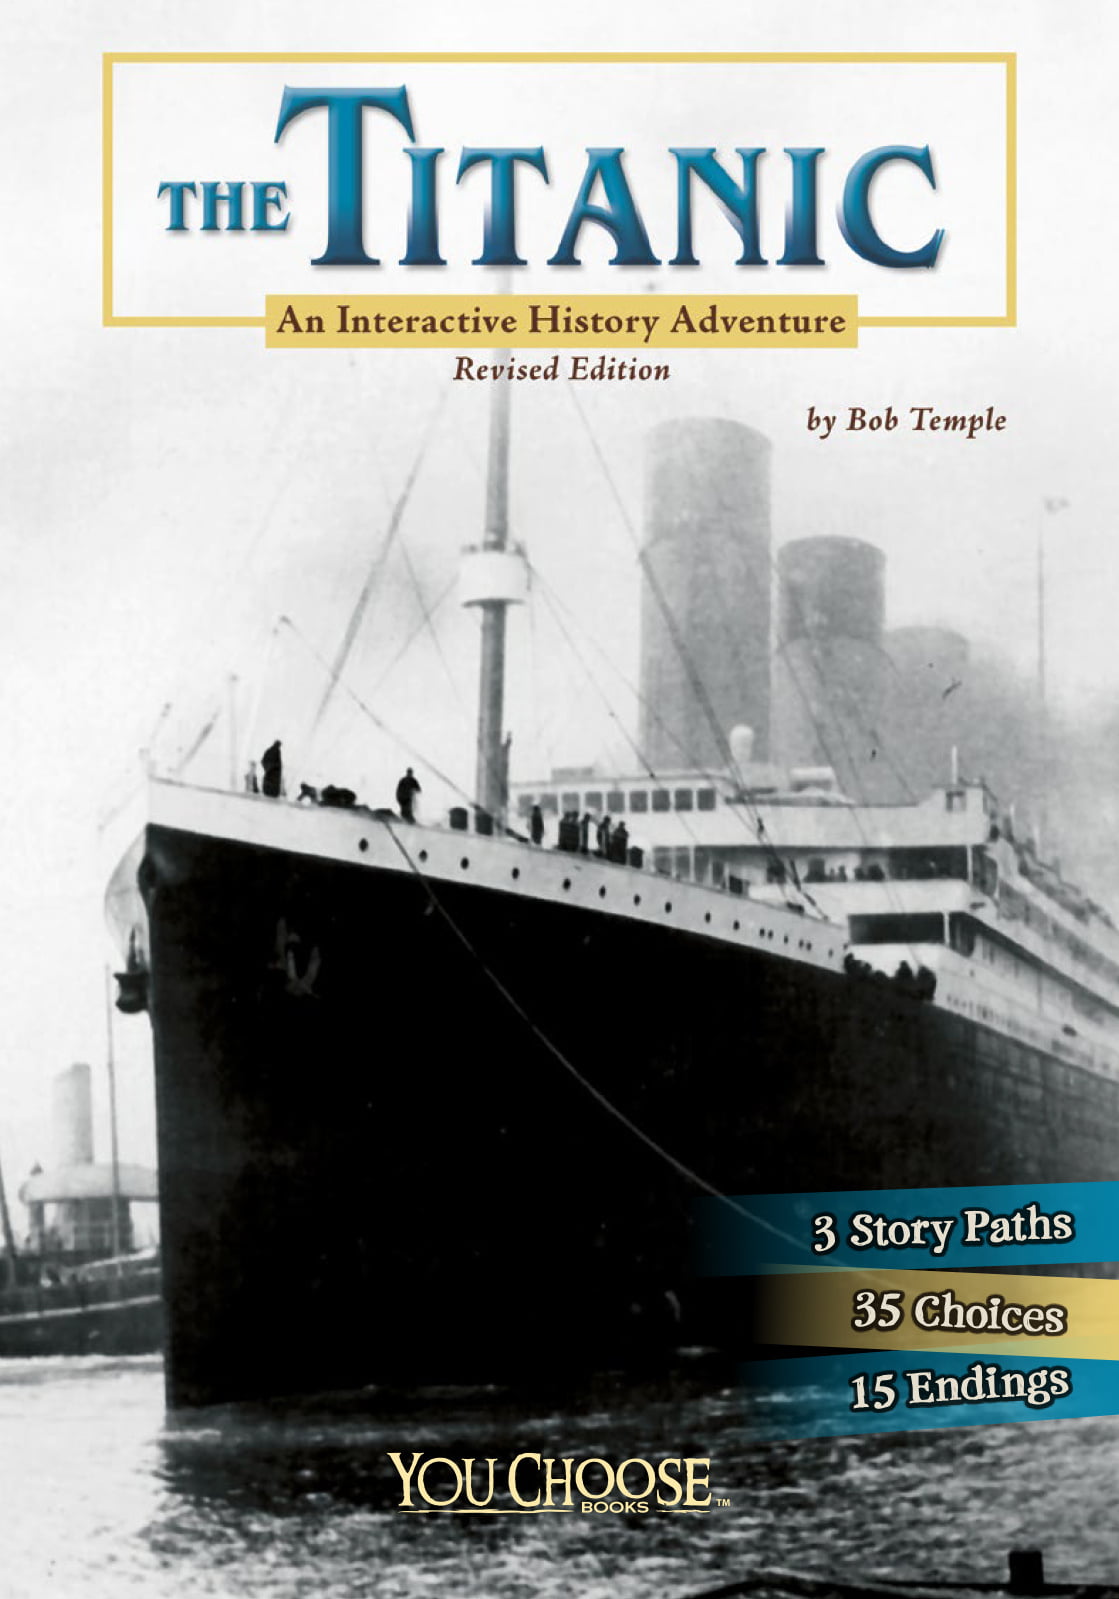 book review of titanic movie